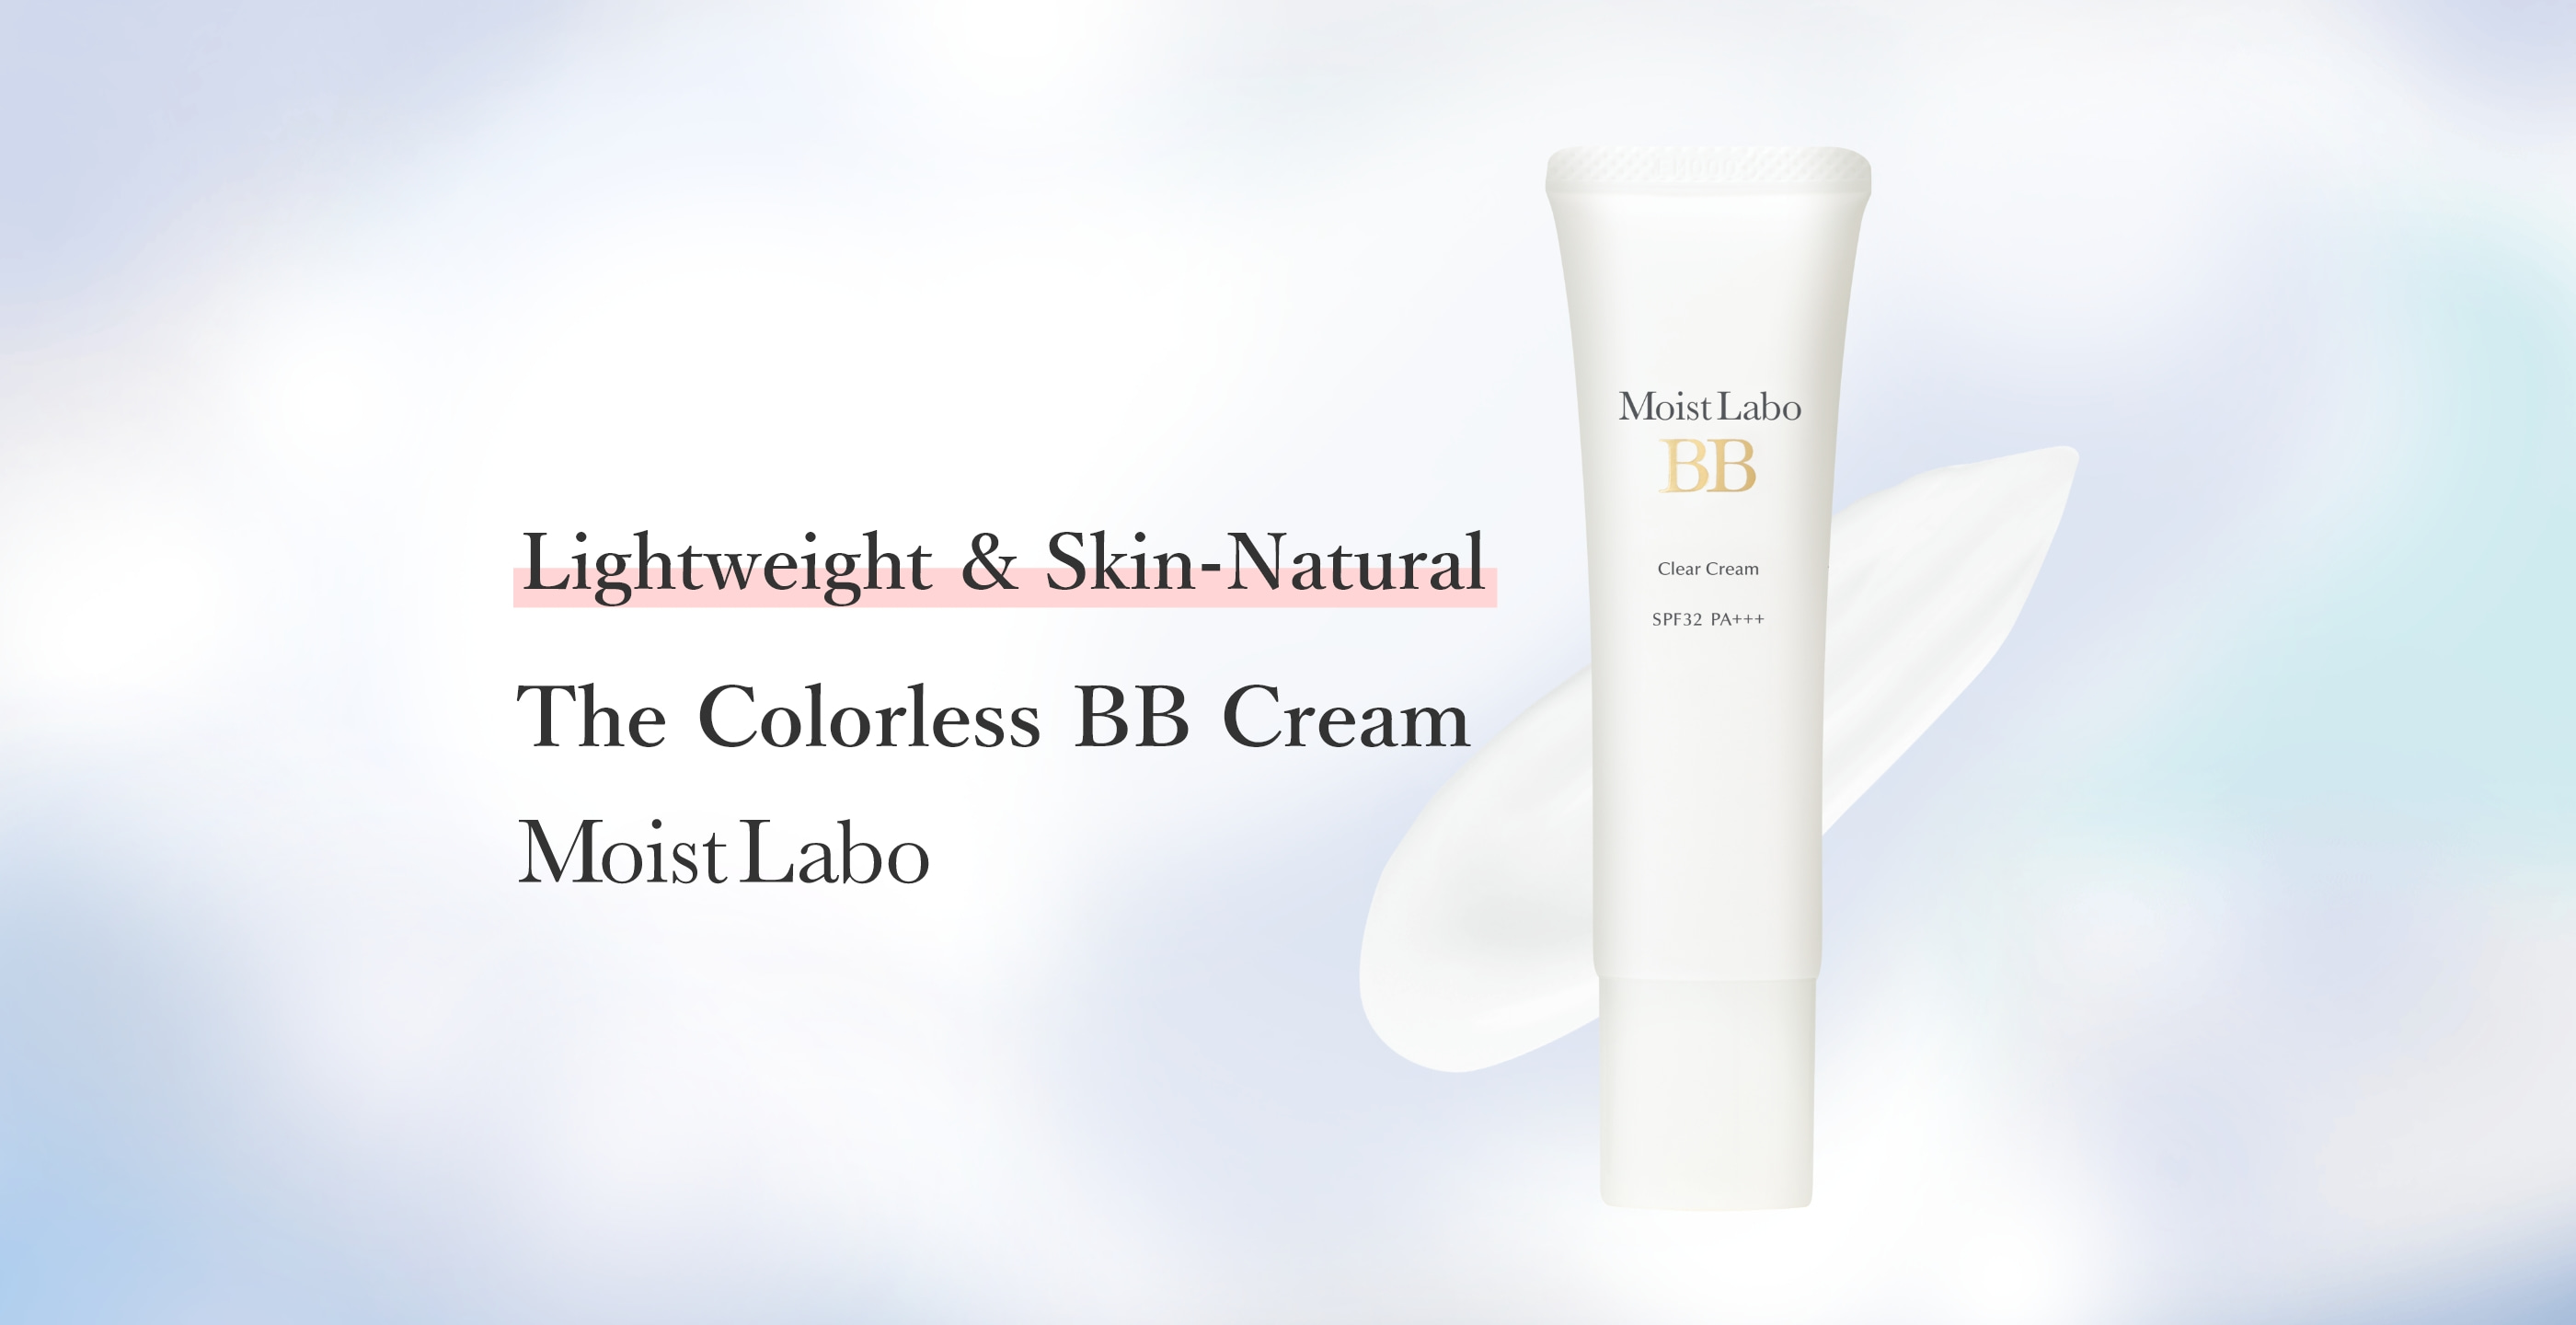 Mosit Labo The Colorless BB Cream